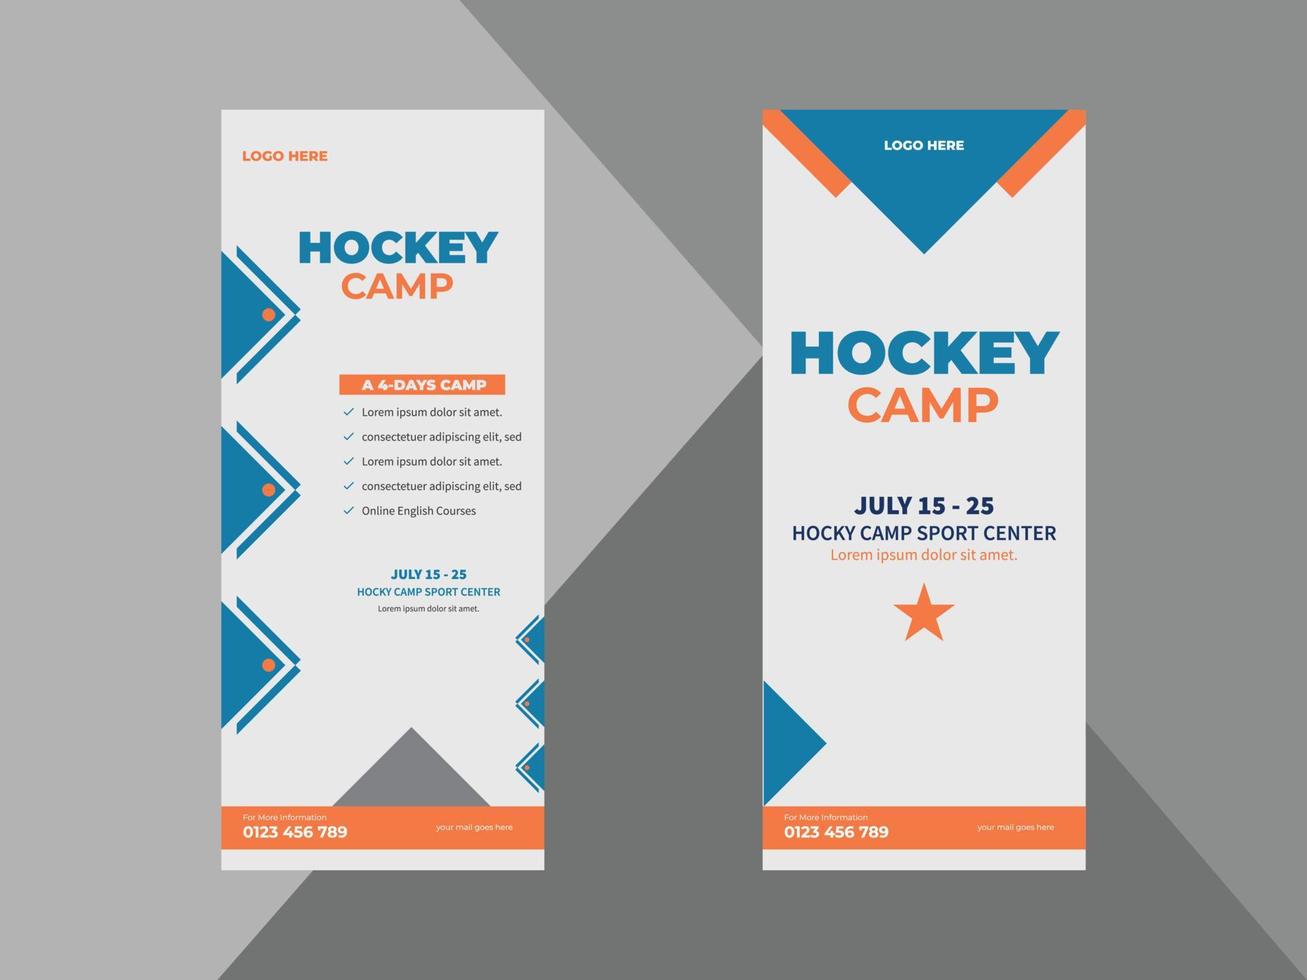 hockey camp roll up banner design template. sports event poster leaflet design. hockey sports flyer. cover, roll up banner, poster, print-ready vector